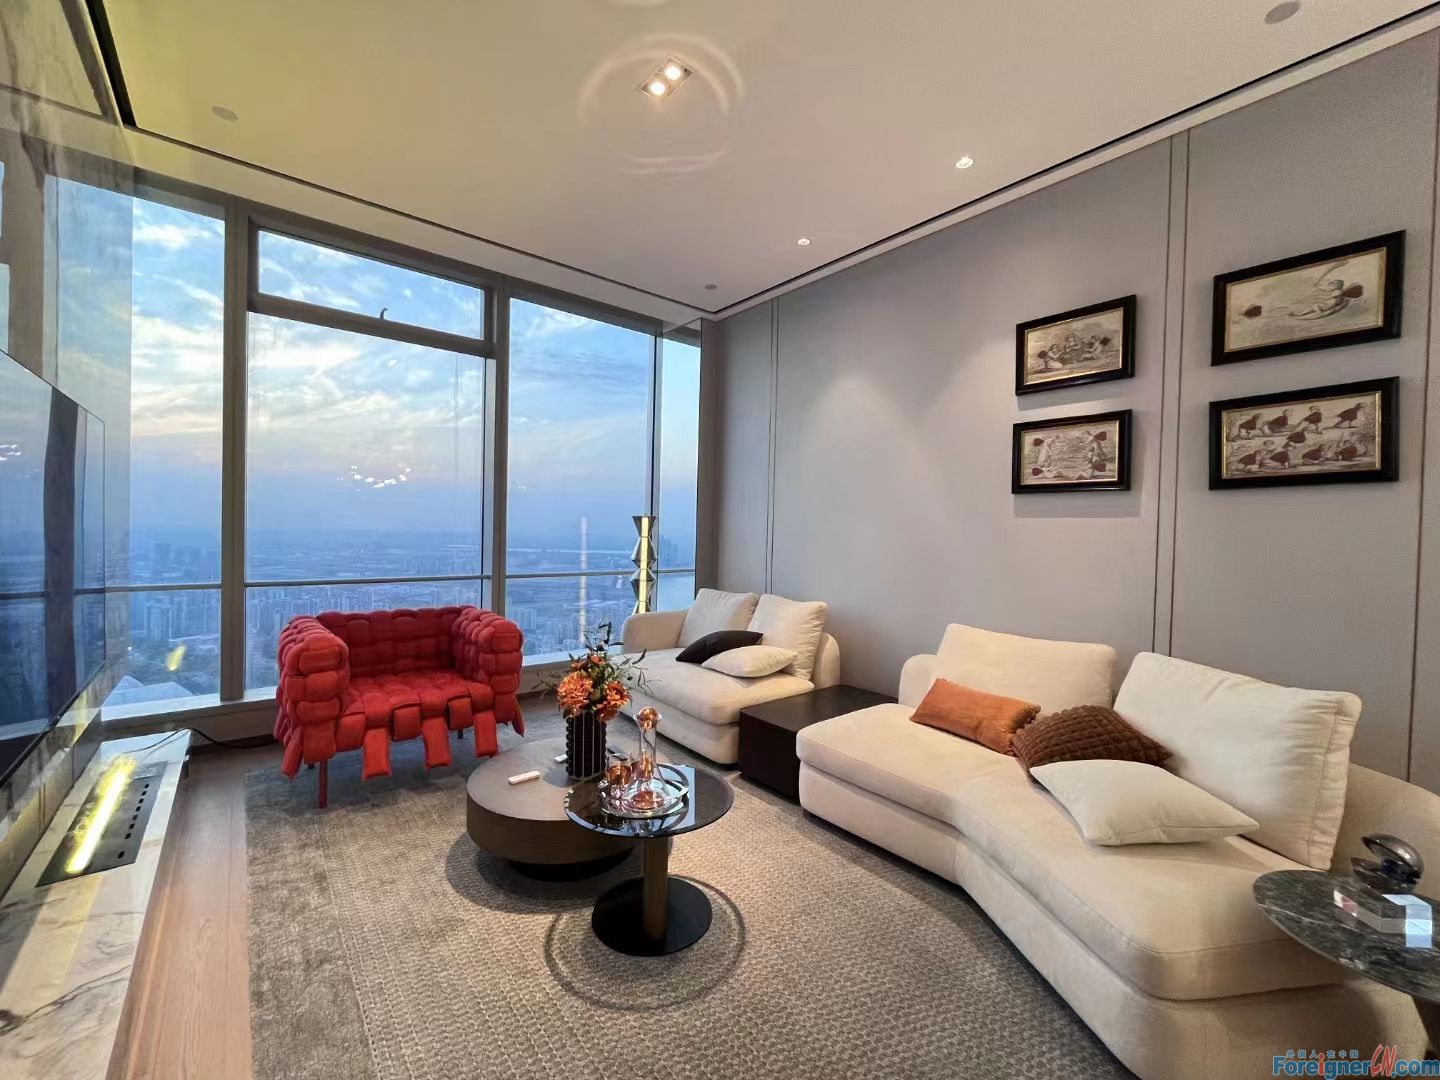 High-End！IFS Sky Residence apartment to rent in SIP/High Floor/ central AC,lots of light room/Nearby Jinji Lake and Moon habor,Shin Kong Palaz/Time Square,Subway line 1 